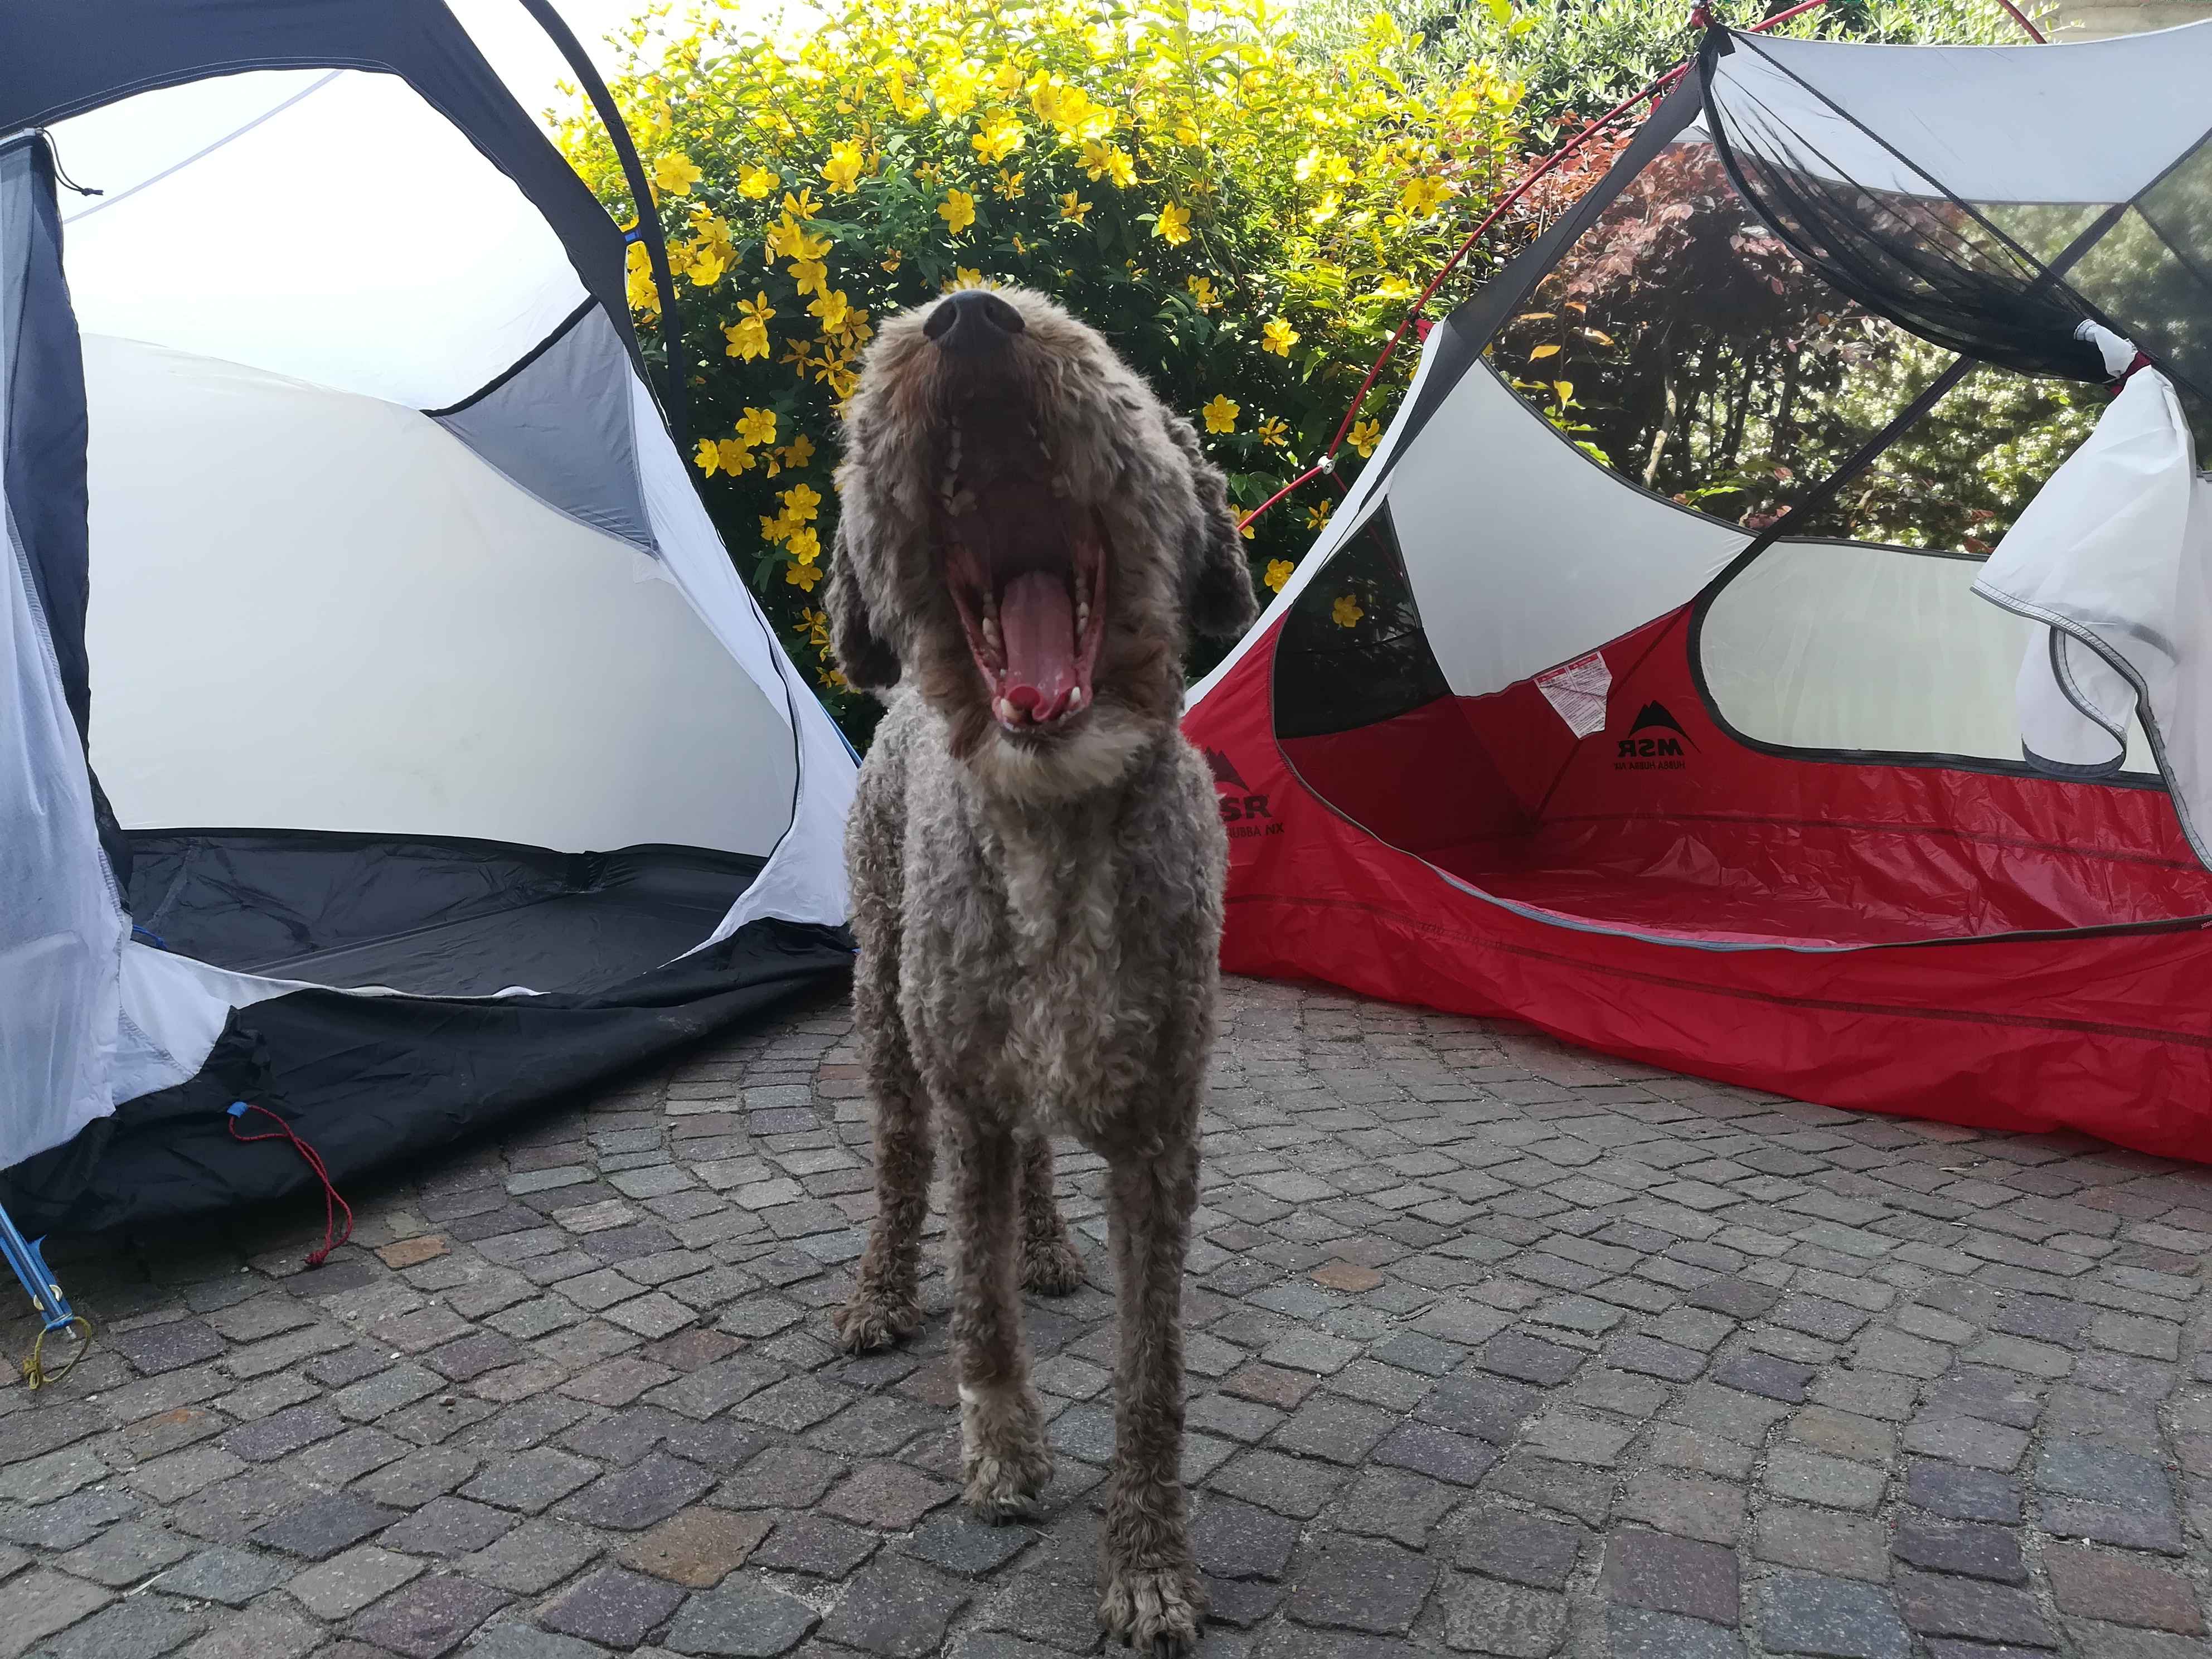 Which tent to take?